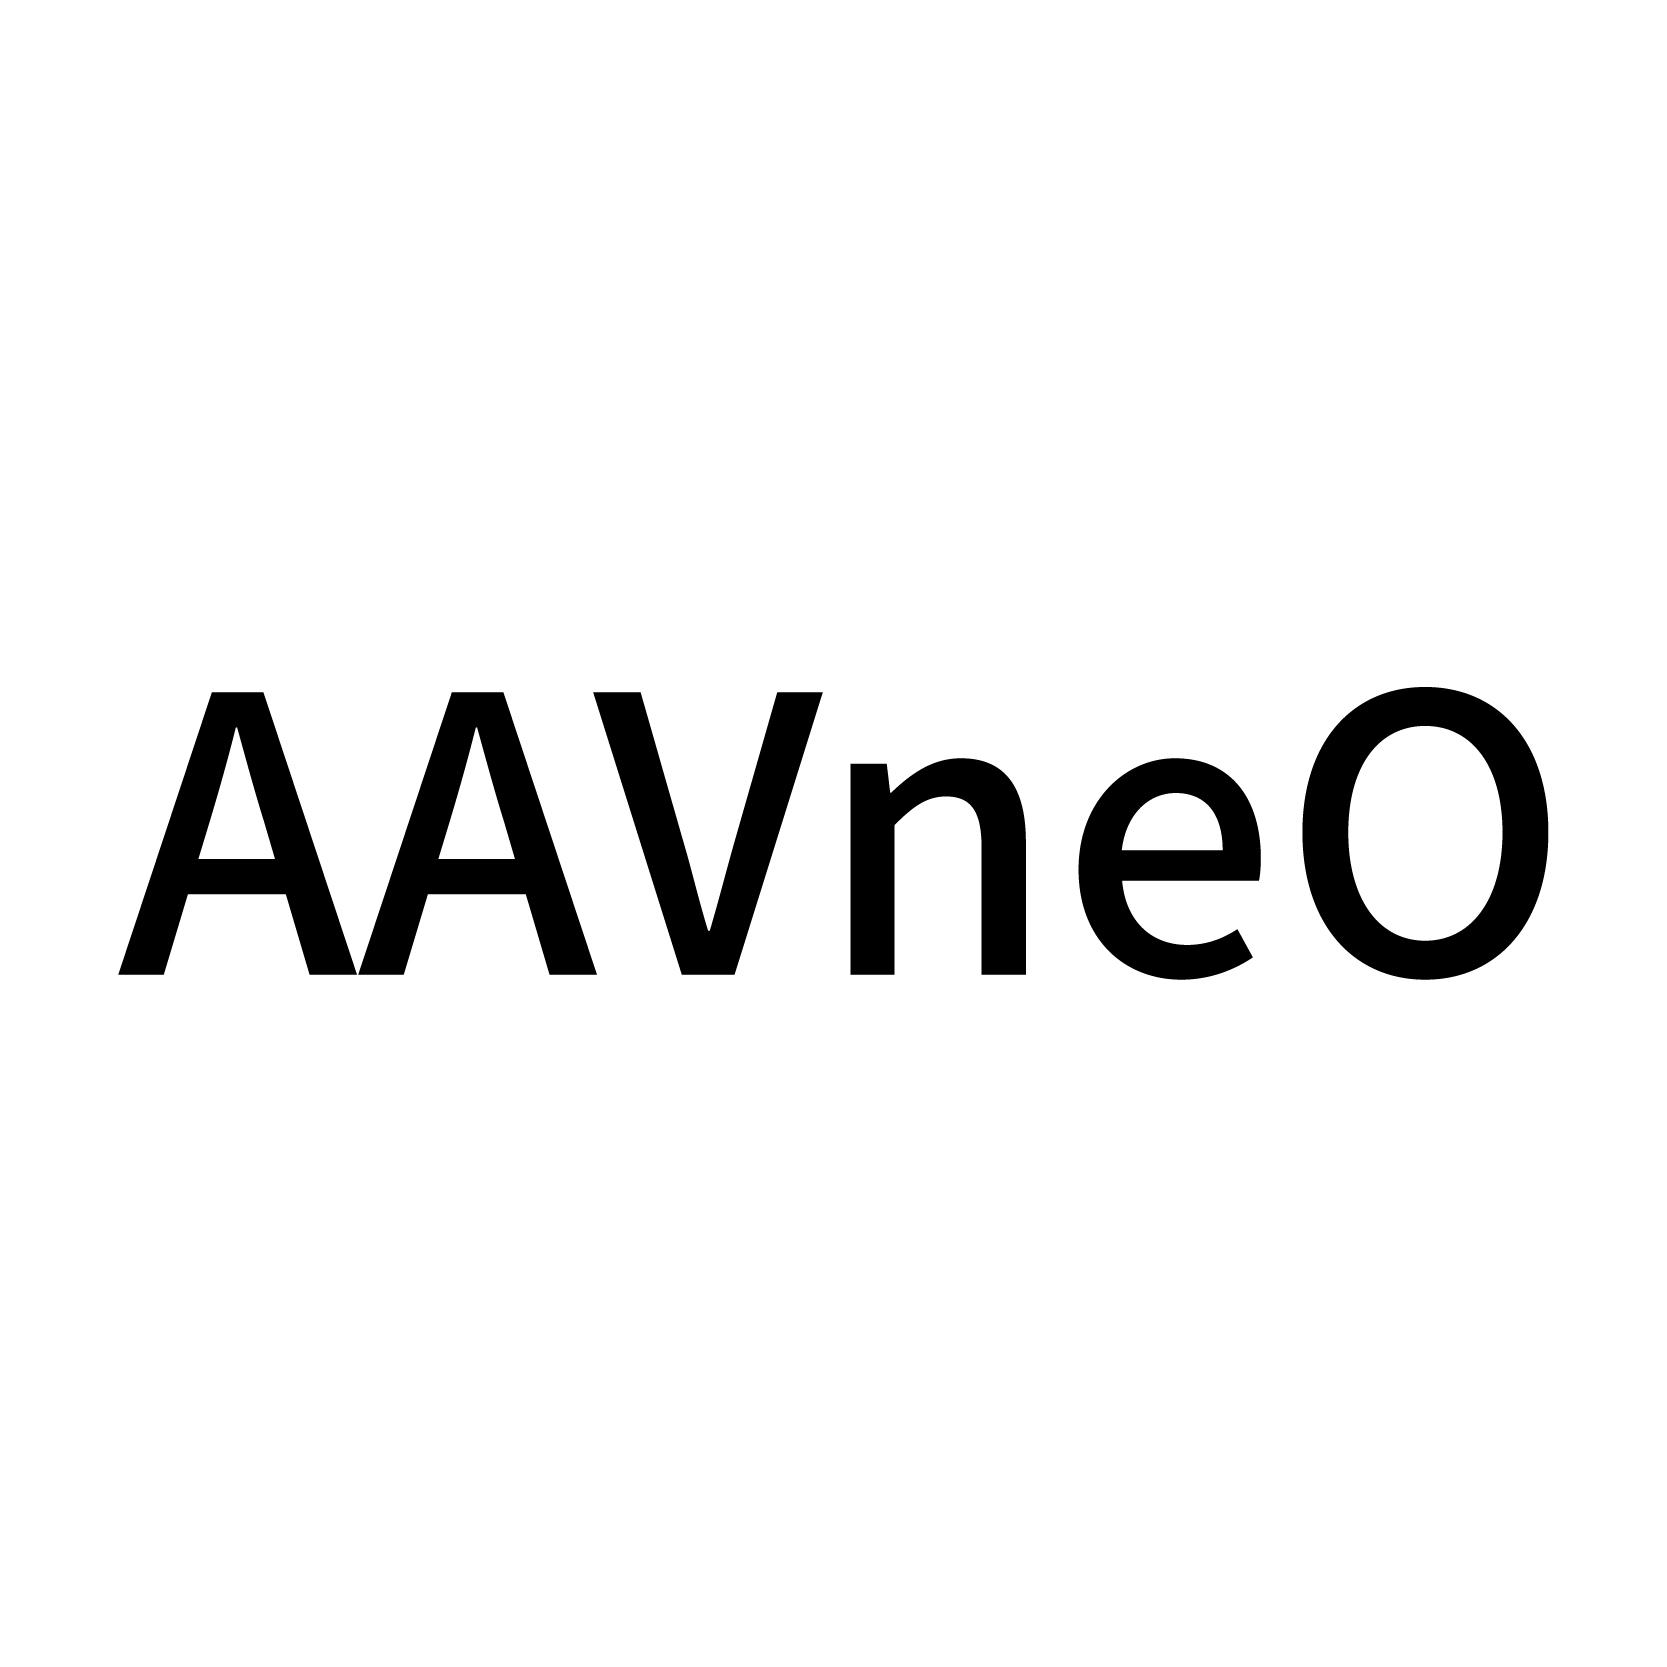 AAVNEO